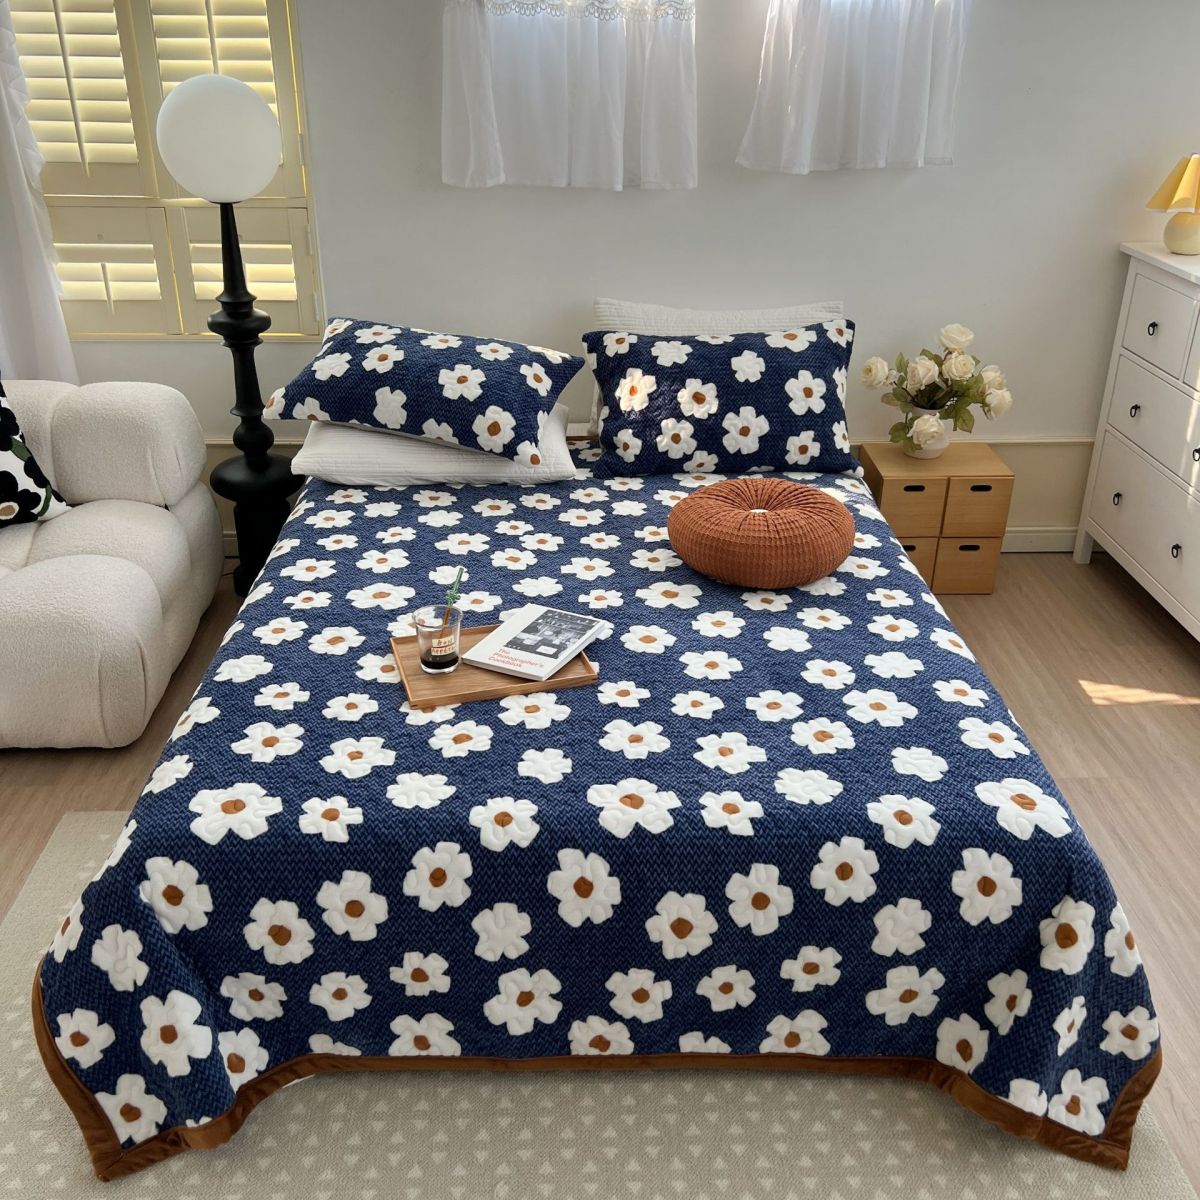 Flannel Bed Sheet Printing Soft Breathable 1-Piece Bed Sheet